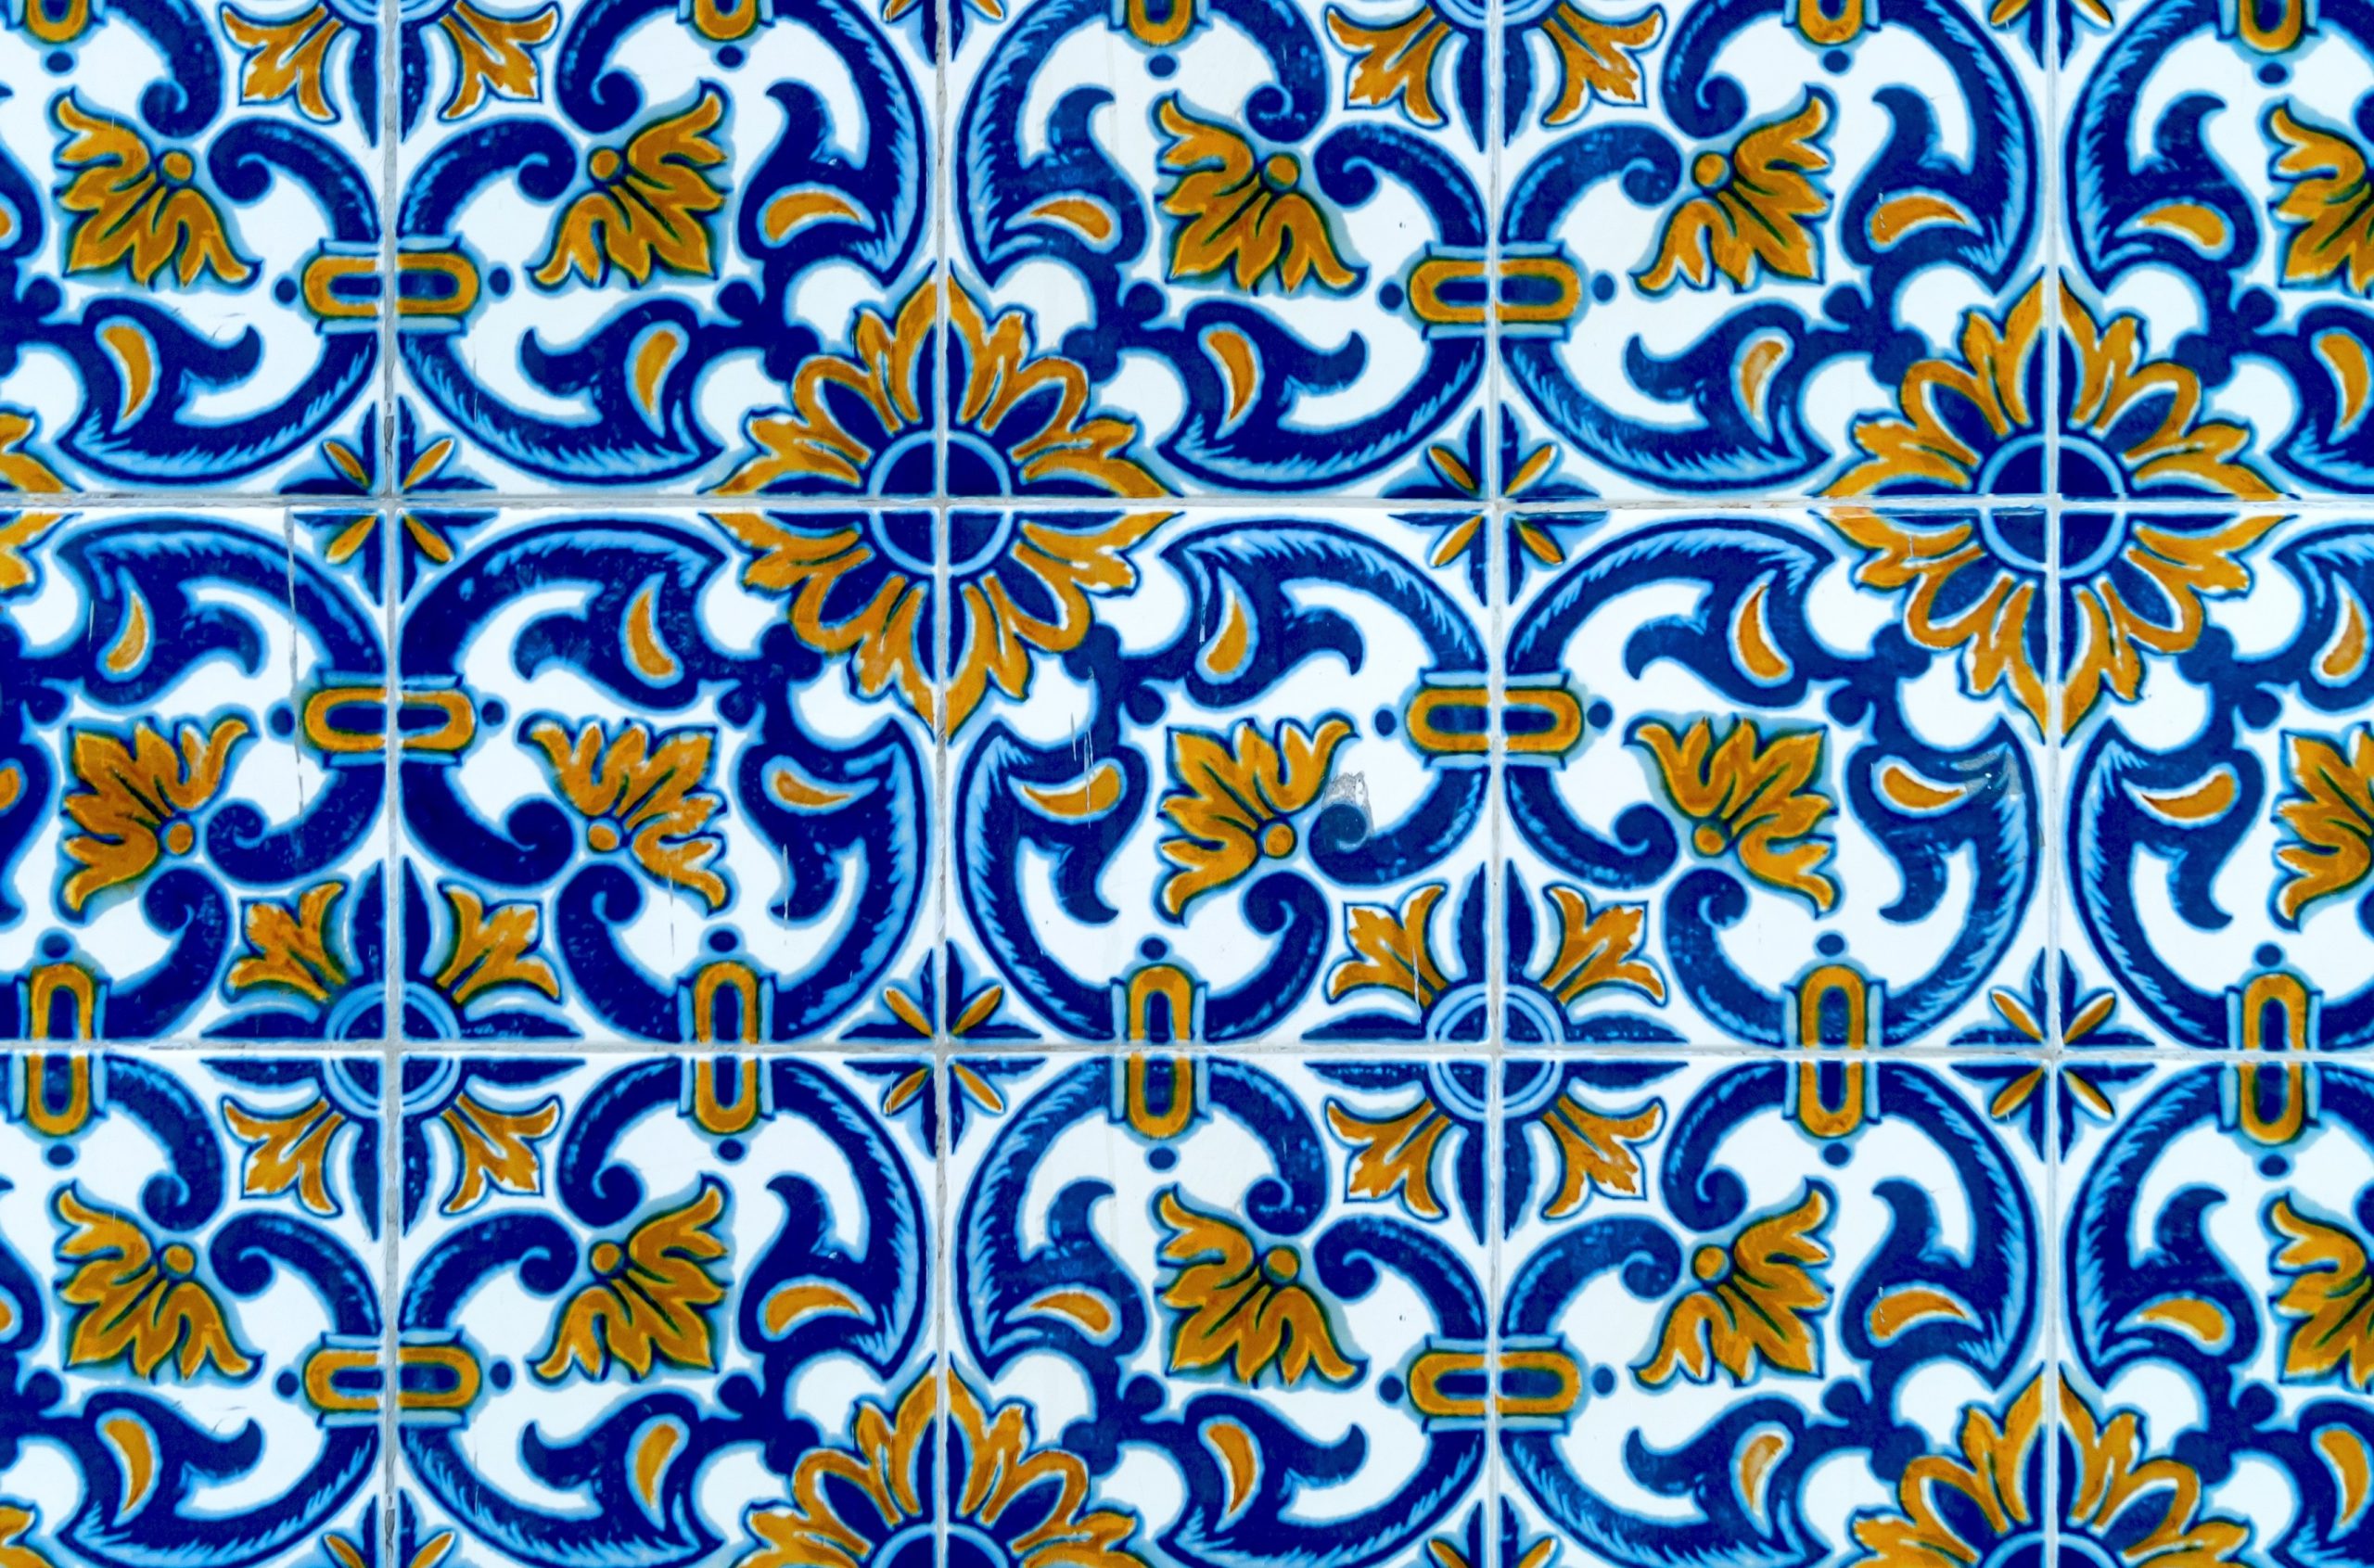 background-photograph-of-antique-portuguese-tile-pattern-in-blue-and-yellow-color (1)